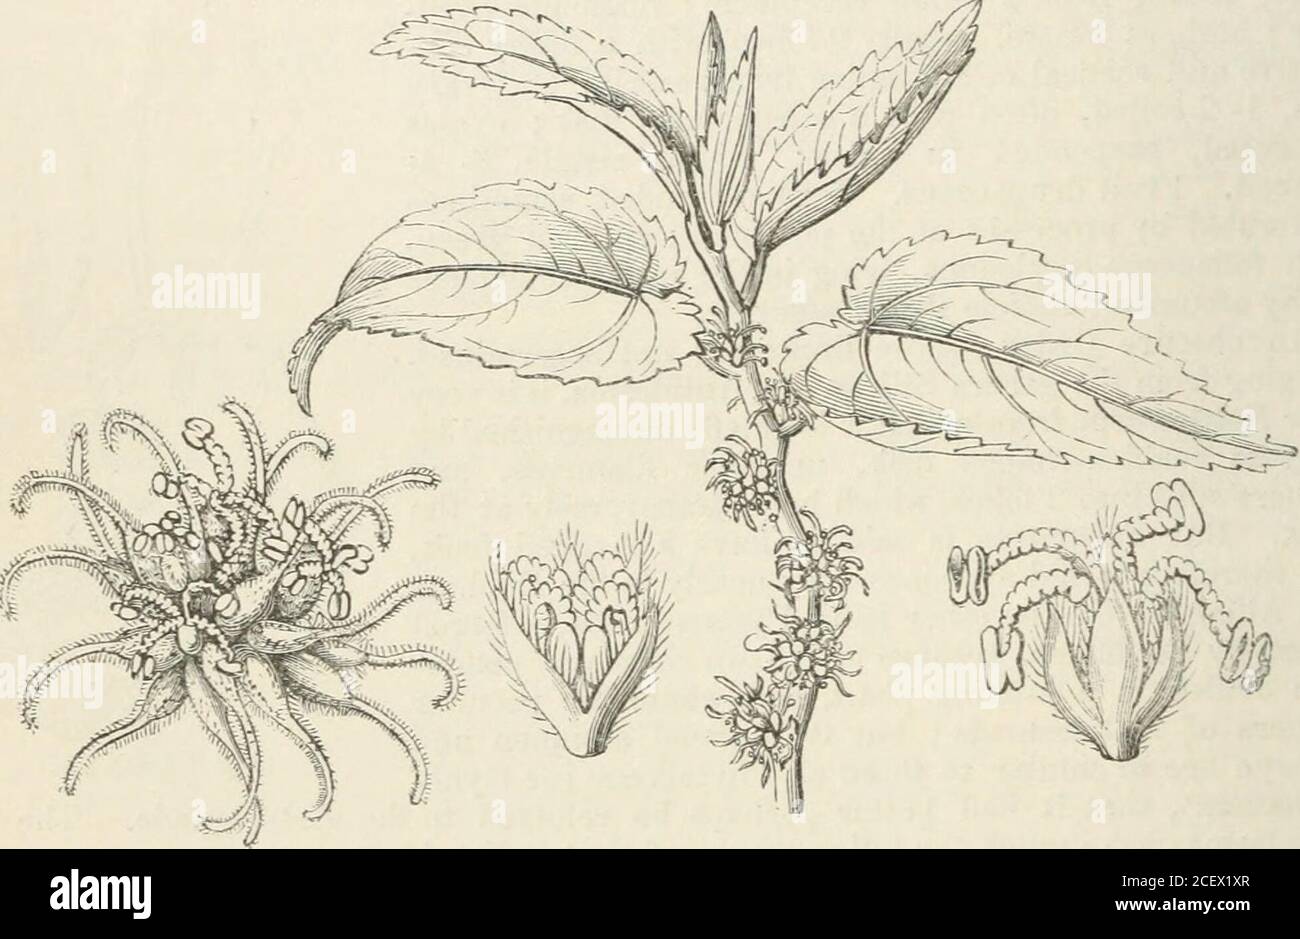 . The vegetable kingdom : or, The structure, classification, and uses of plants, illustrated upon the natural system. Fig. CLXXIV. The male Fig. CLXXIV.—Stilago lanceolata. 1. $ flower; 2. half ripe fruit; 3. a transverse section of the fruitand seed ; 4. a perpendicular section of a seed. 260 URTICACE^. [Diclinous Exogens. Order LXXXIV. URTICACE^.—Nettleworts. Urtice^, Juss. Gen. 400. (1789); Gaudichaud in Freyc. Voyage, p. 503. (1826); Bartl. Ord. Nat 105. Urticacese, Endlich. Prodr. Nor/. 37 ; Gen. xciv.; Meisner, p. 348.DixGso?&gt;ii.—Urtical Exogens, with small flat stipules, limpid juice Stock Photo